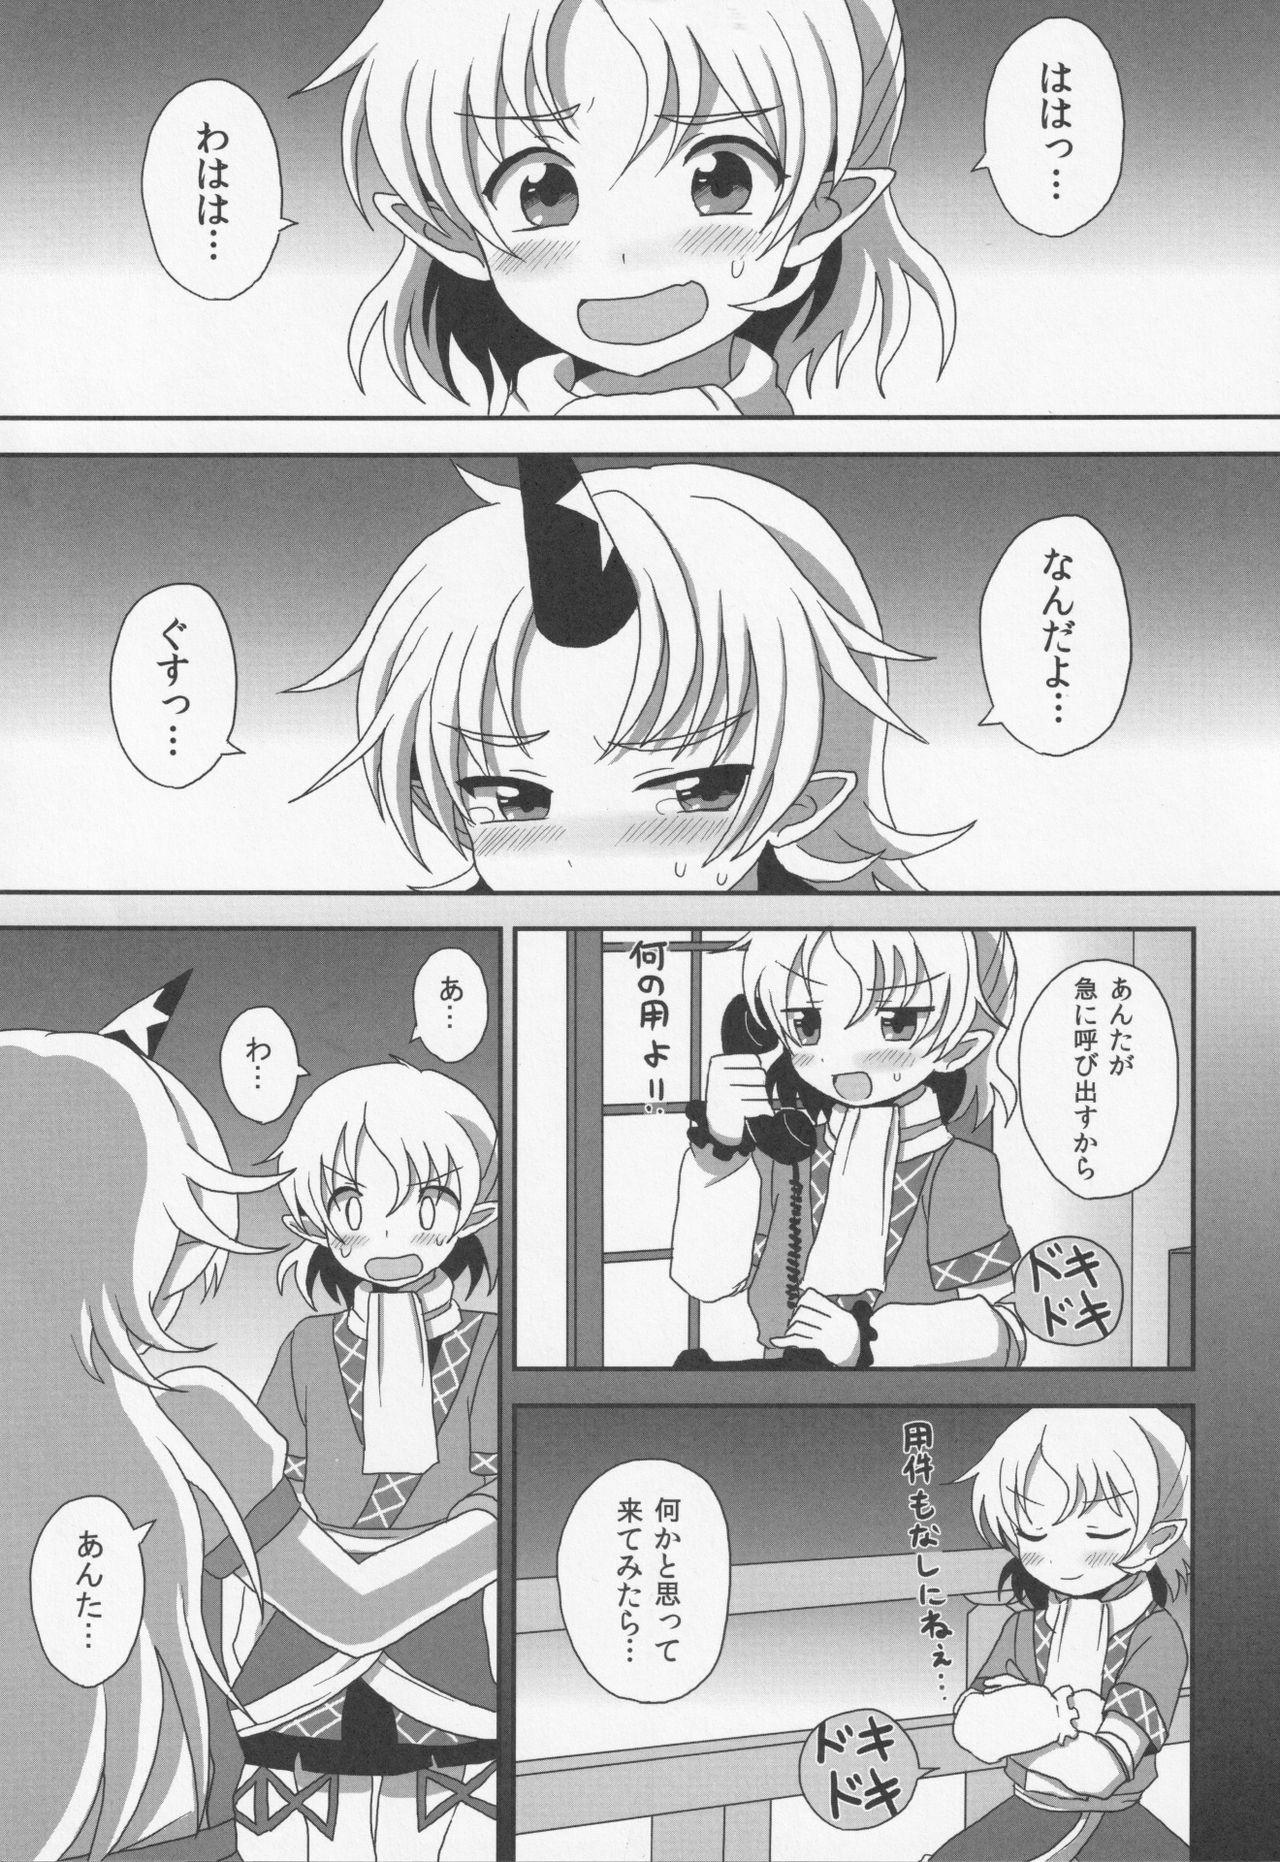 18 Year Old (C80) [Bottle Syrup (Inaho)] -Kyuuto de Watashi to Tsukiatte- (Touhou Project) - Touhou project Amazing - Page 4